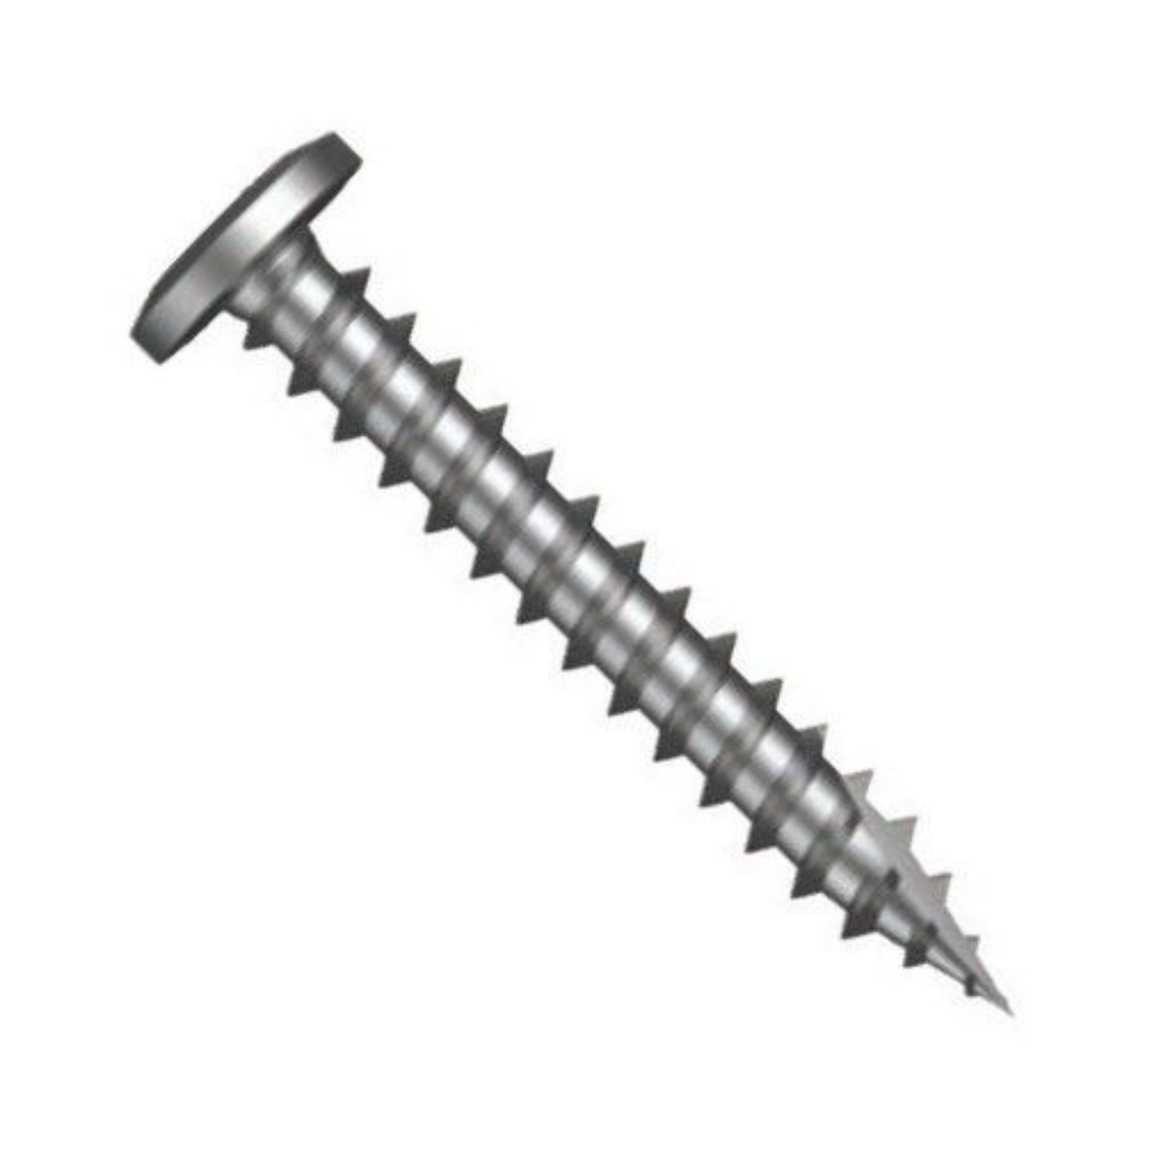 Picture of Timber Self Drilling Screws Wafer Head Phillips Dr CL3: #10-12 x 35